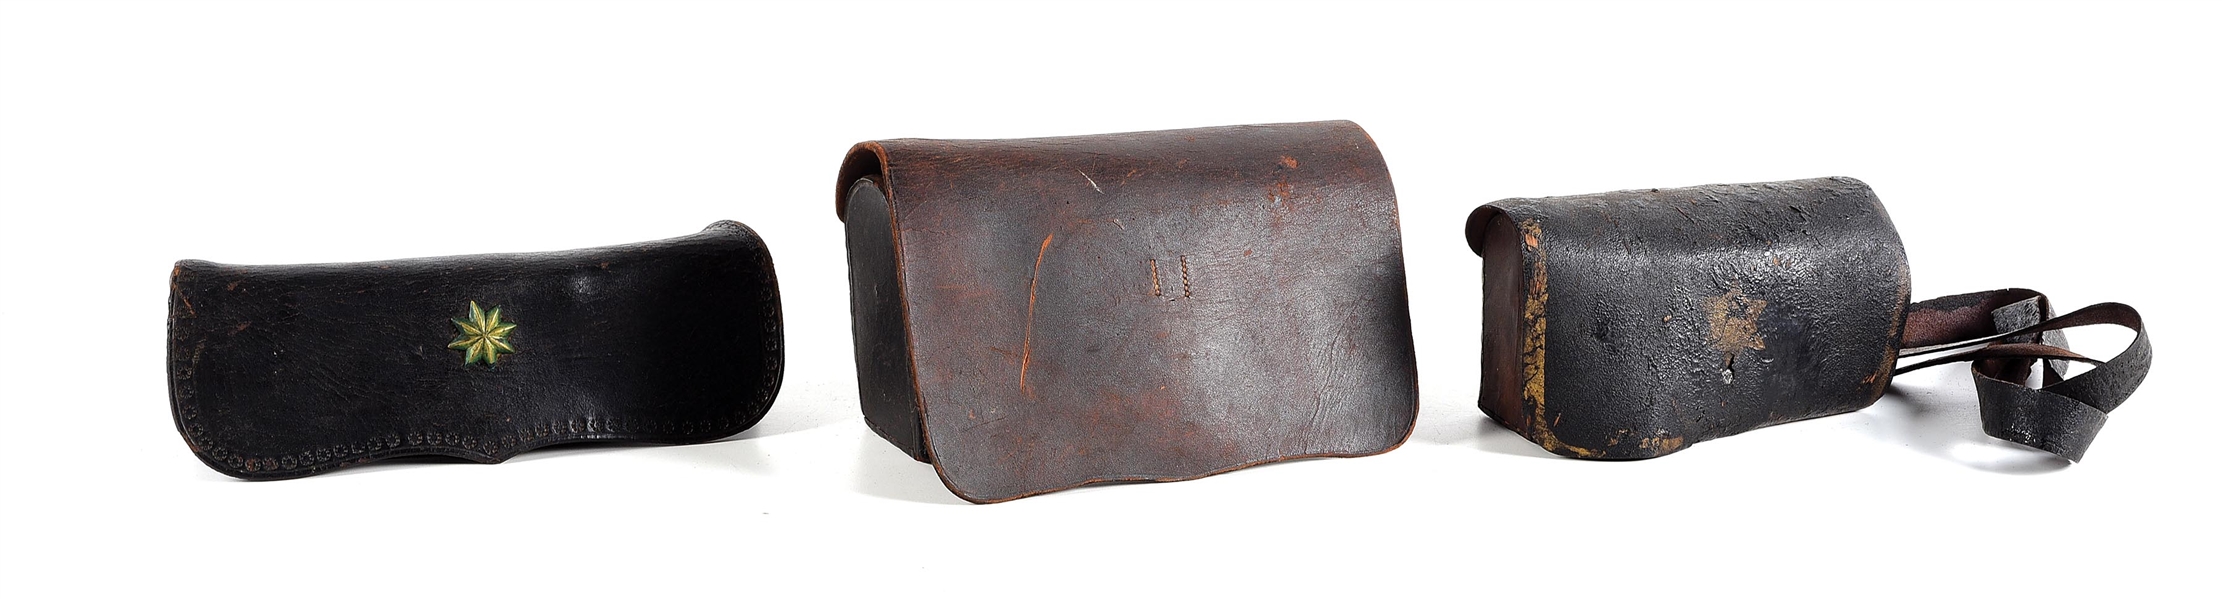 LOT OF 3: LATE 18TH-EARLY 19TH CENTURY CARTRIDGE BOXES.